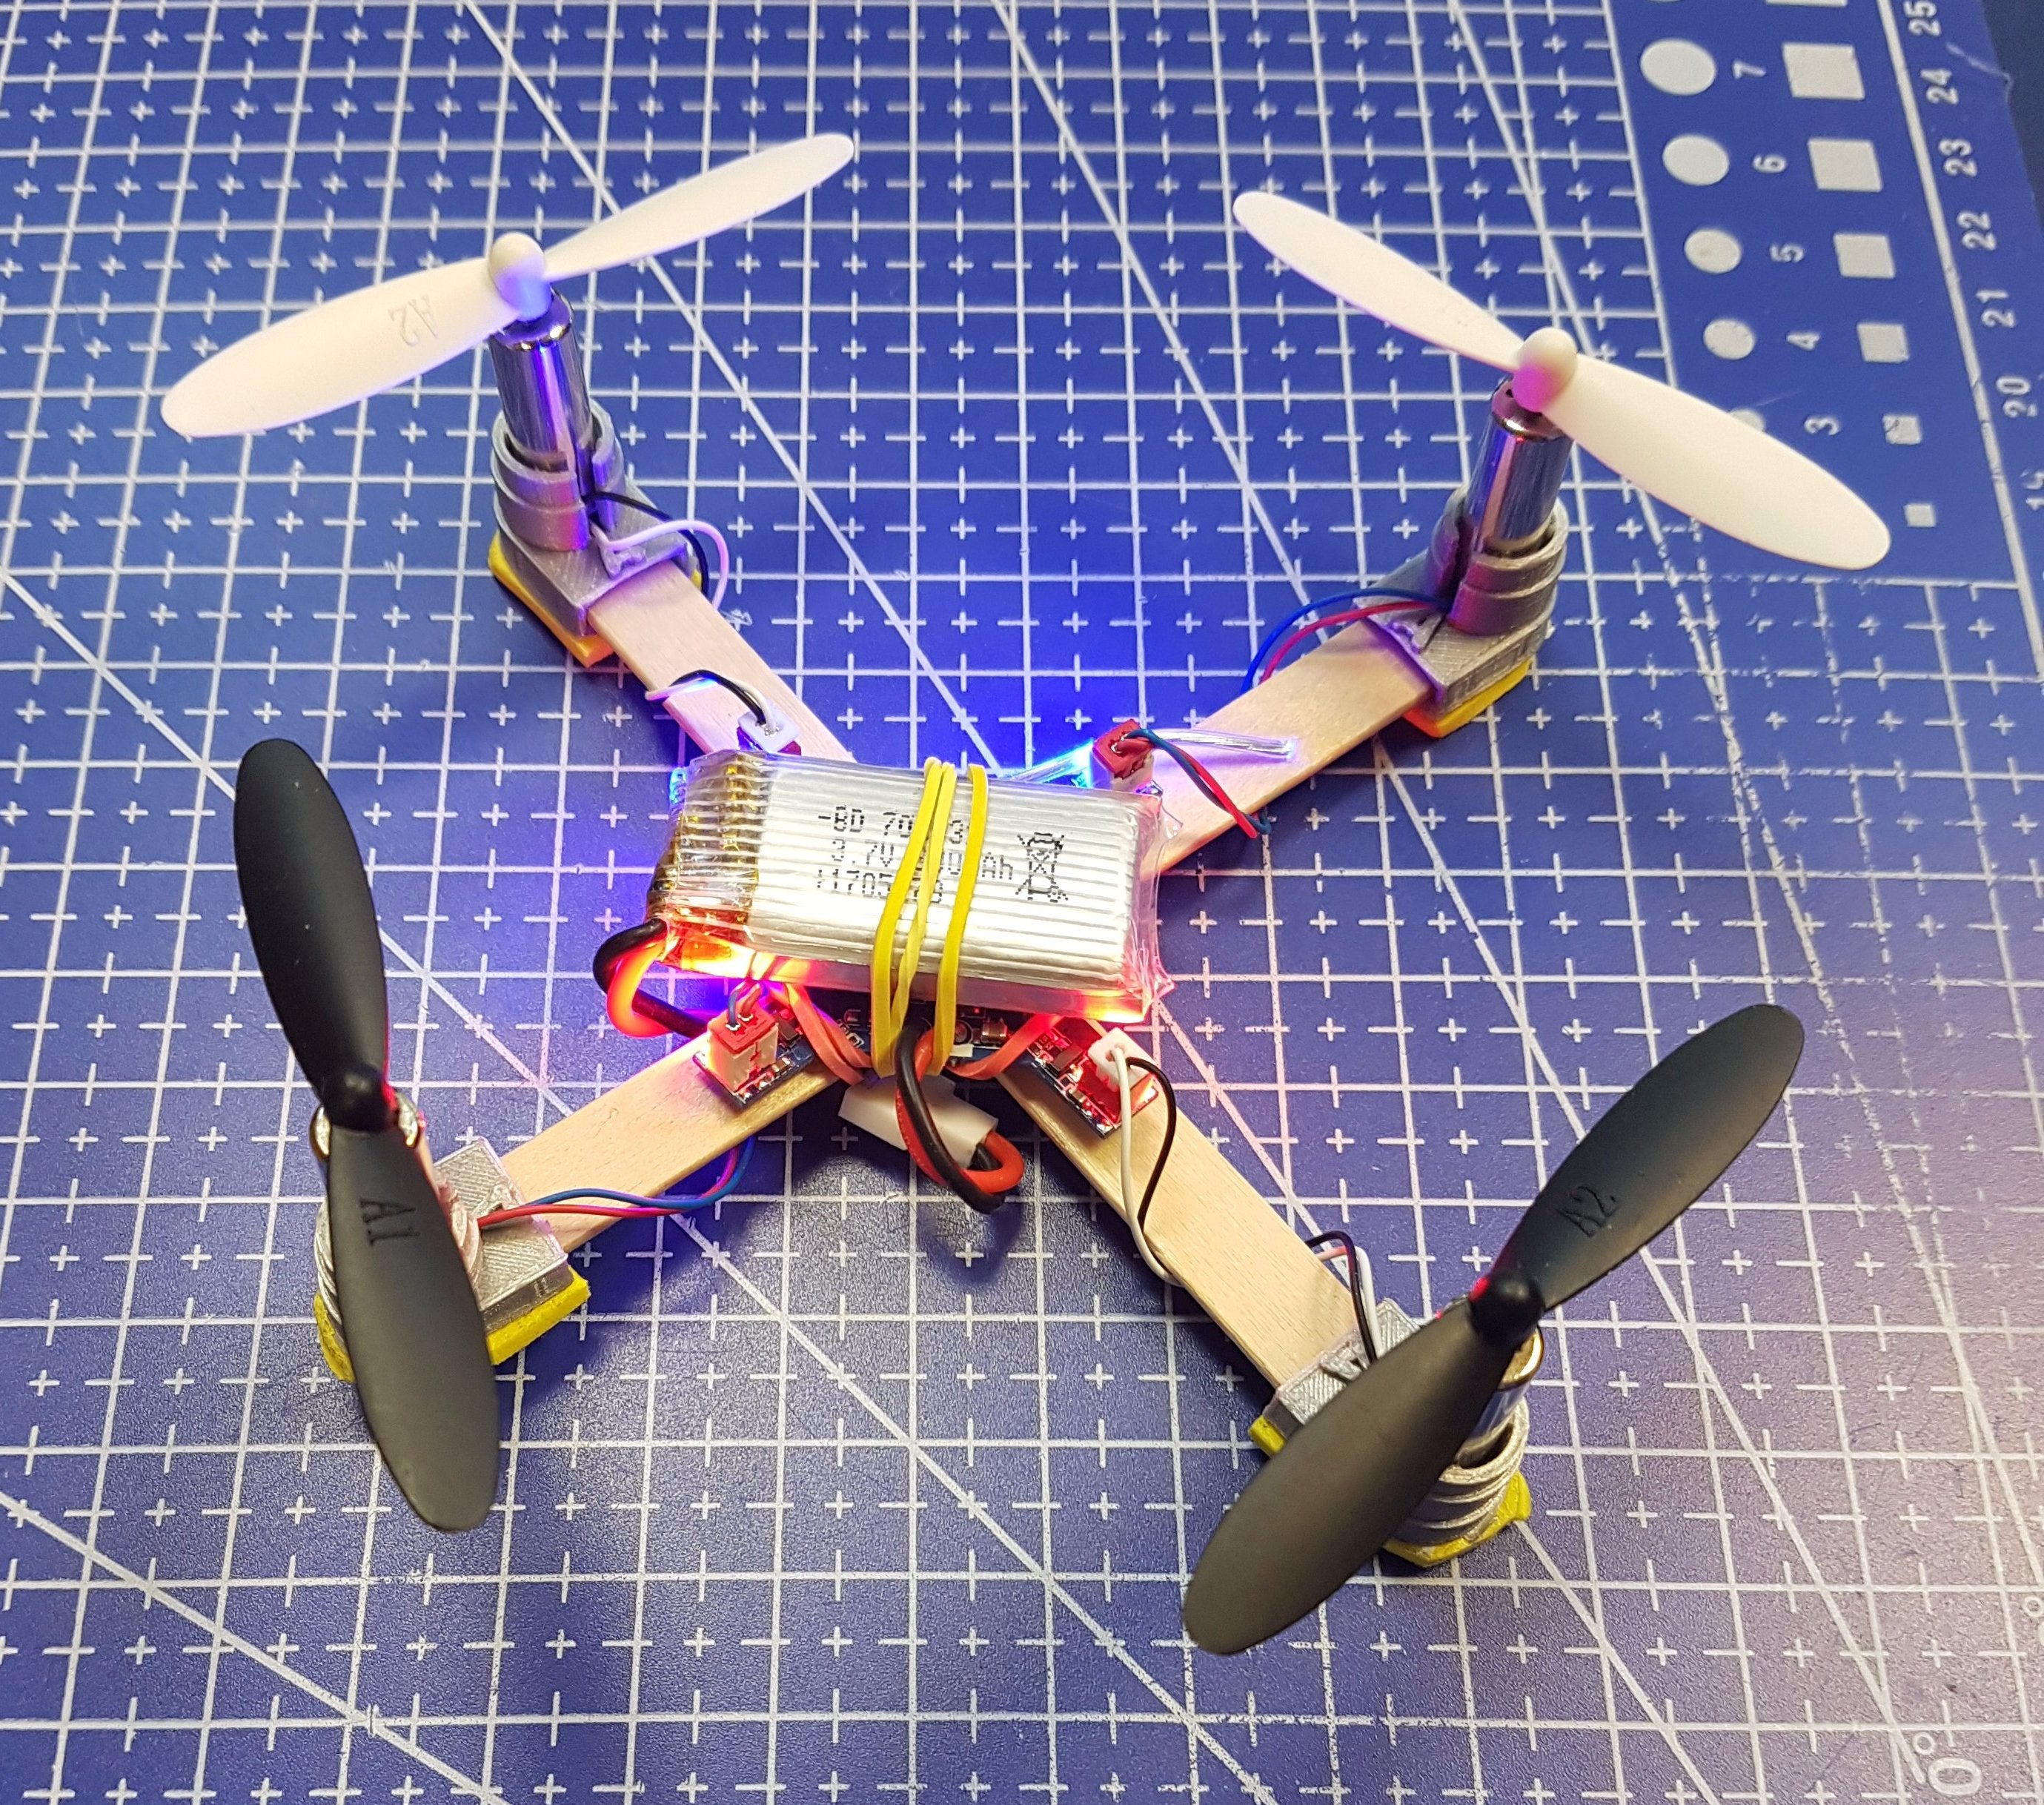 Hummingbird / Makerspace Package: 12 Drone building kit with camera extra batteries, for laser cutter / 3D printer